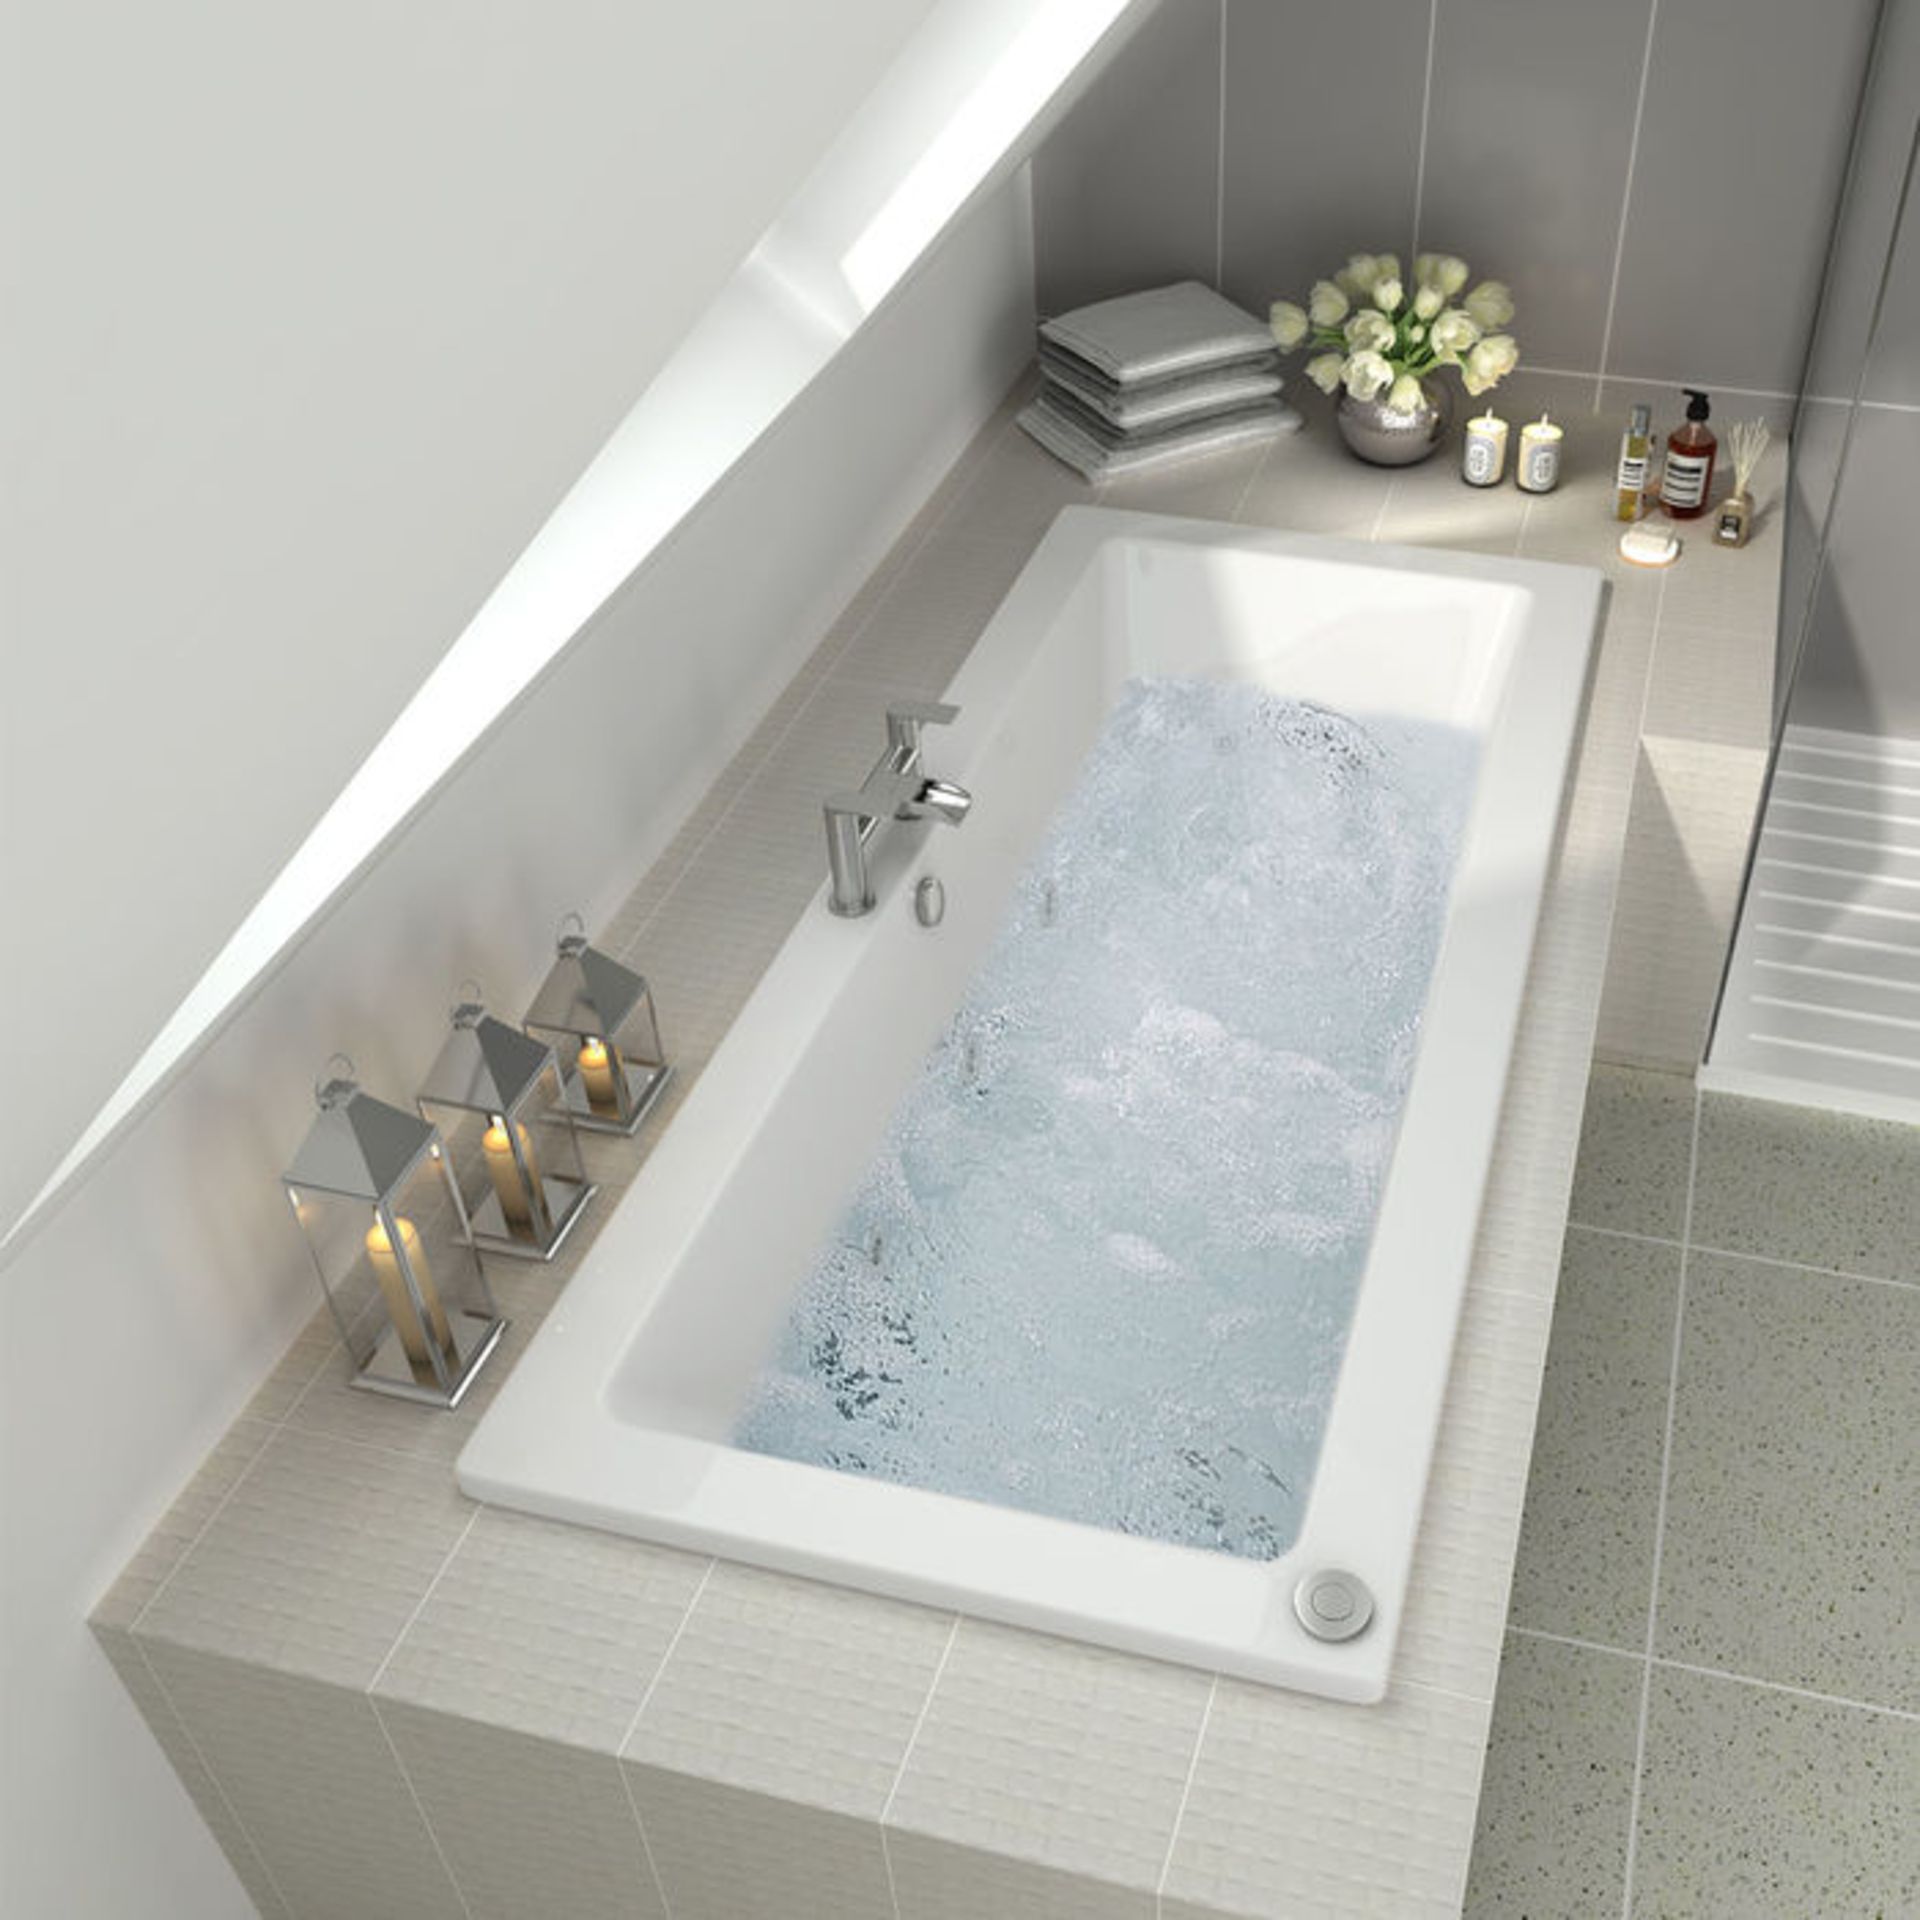 (ZL2) Whirlpool Double Ended Bath 1700 x 750mm (14Jets). We love this because it feels as though you